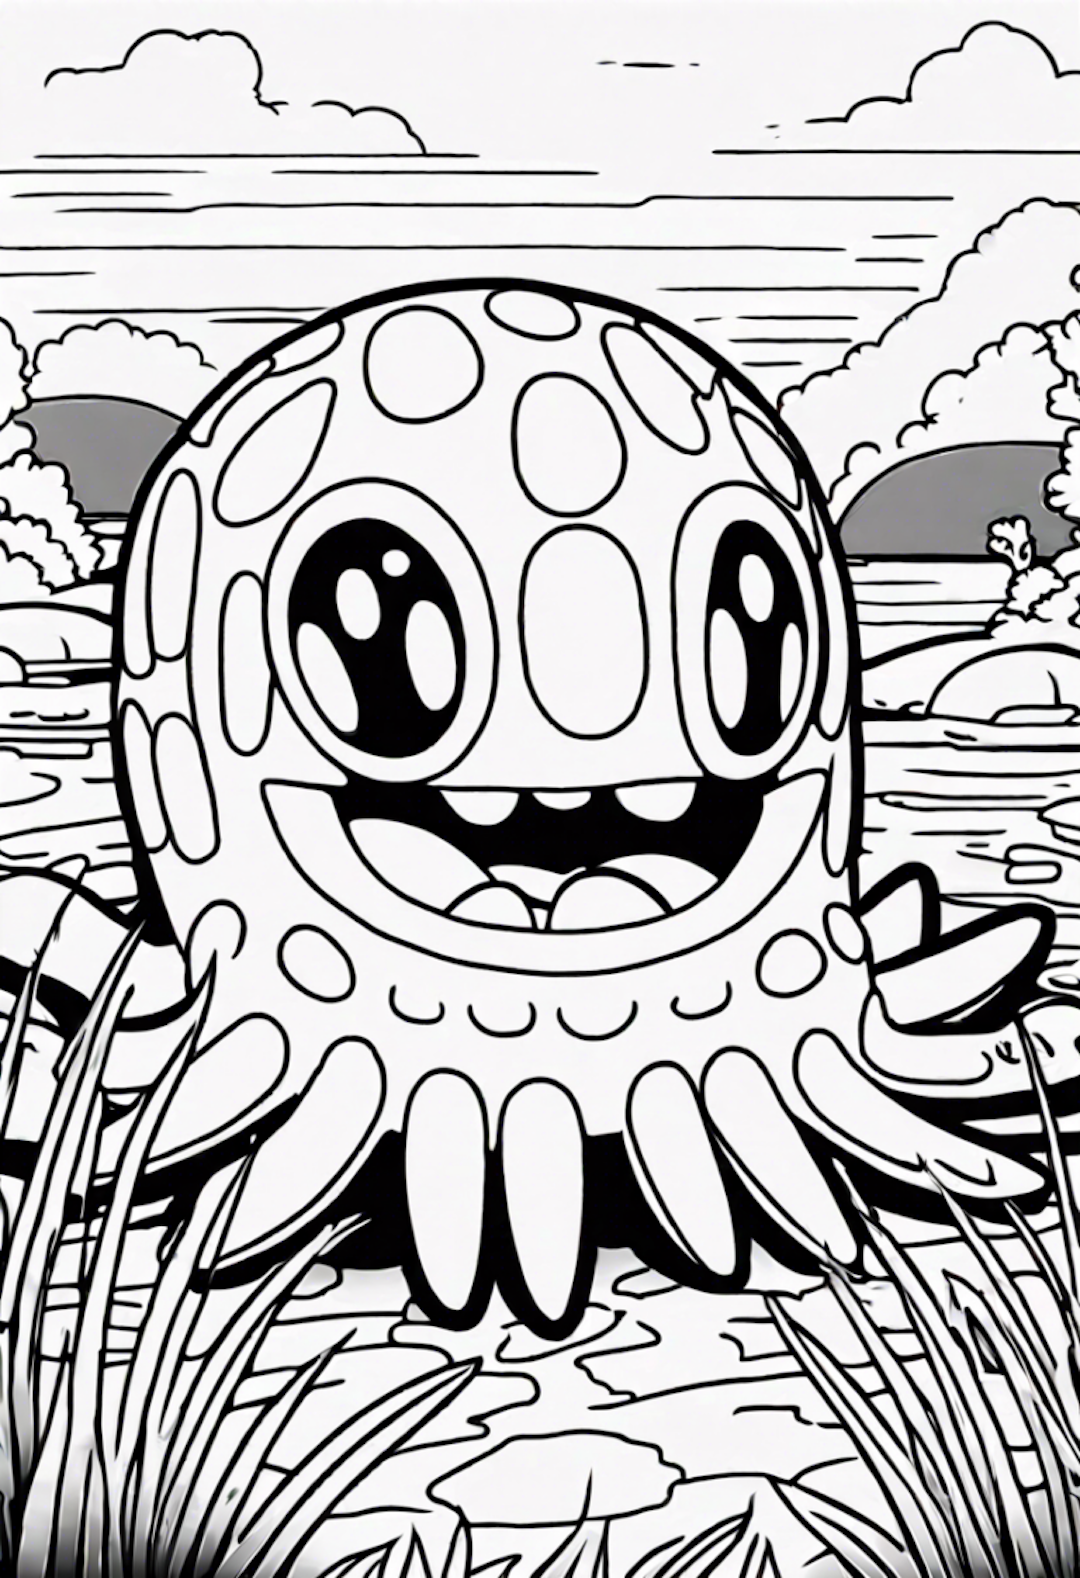 Happy Octopus in a Sunny Seaside Scene coloring pages